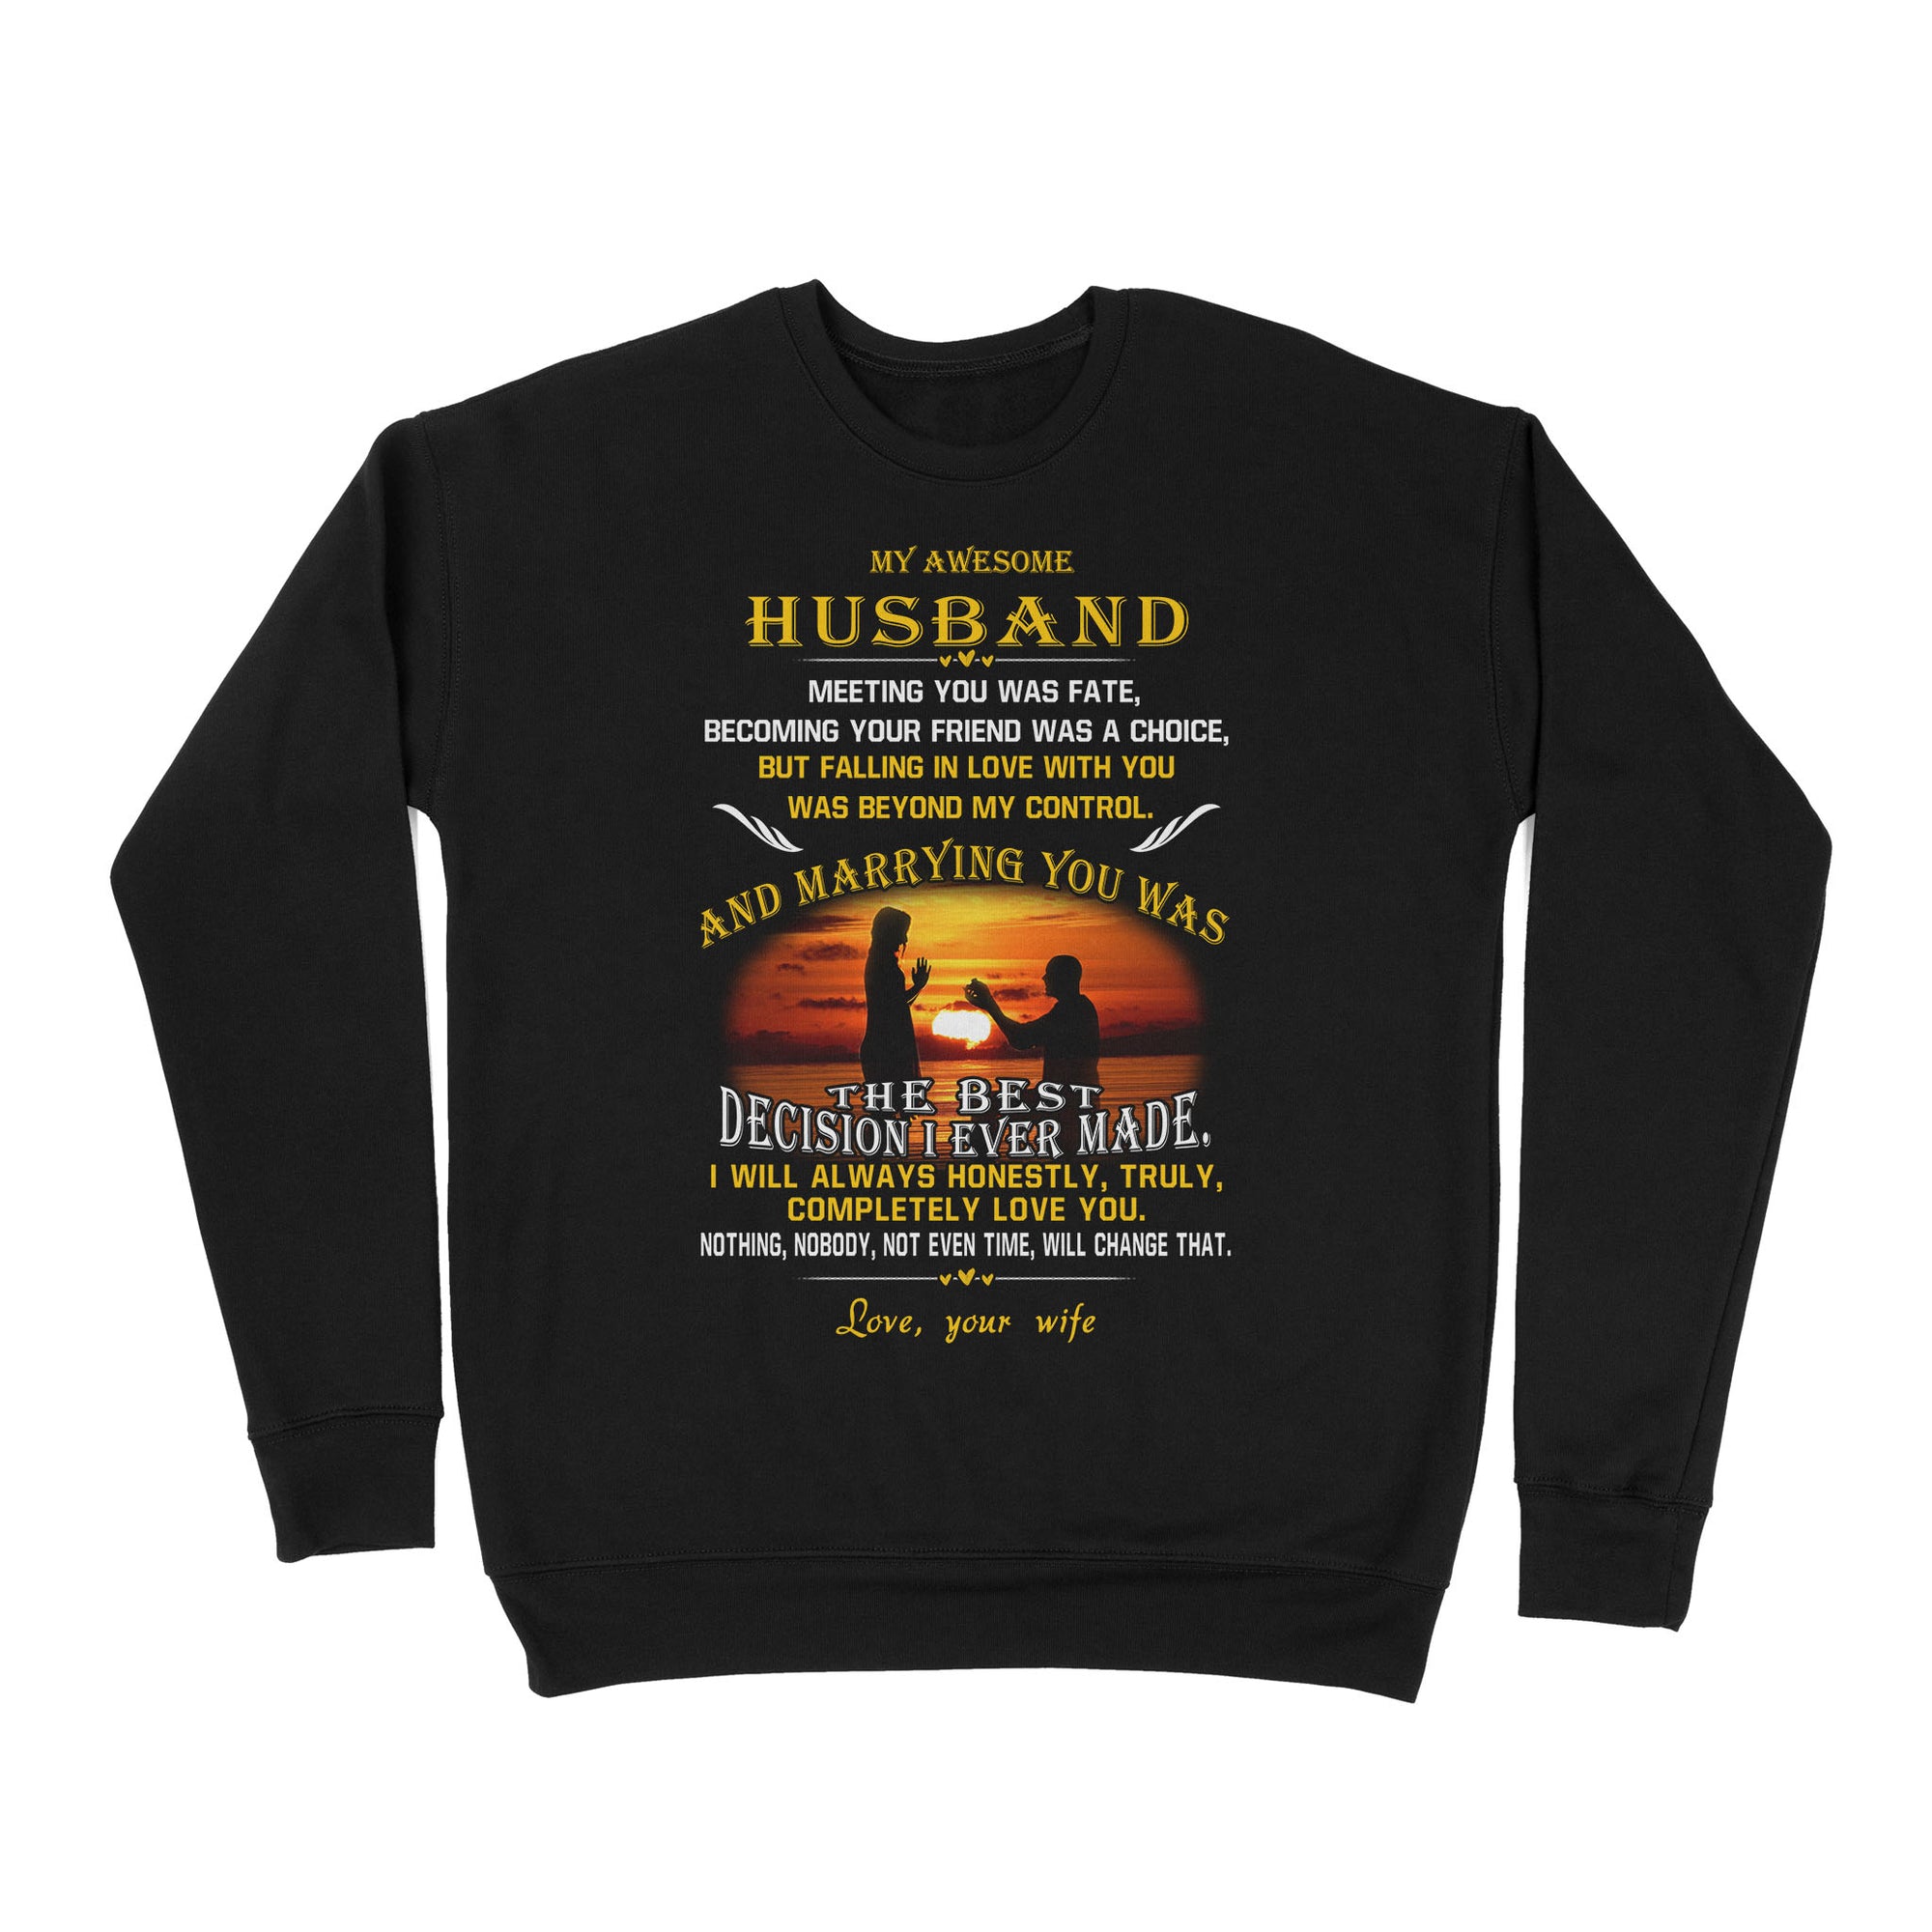 My Awesome Husband Meeting You Was Fate Becoming Your Friend Was A Choice - Premium Crew Neck Sweatshirt